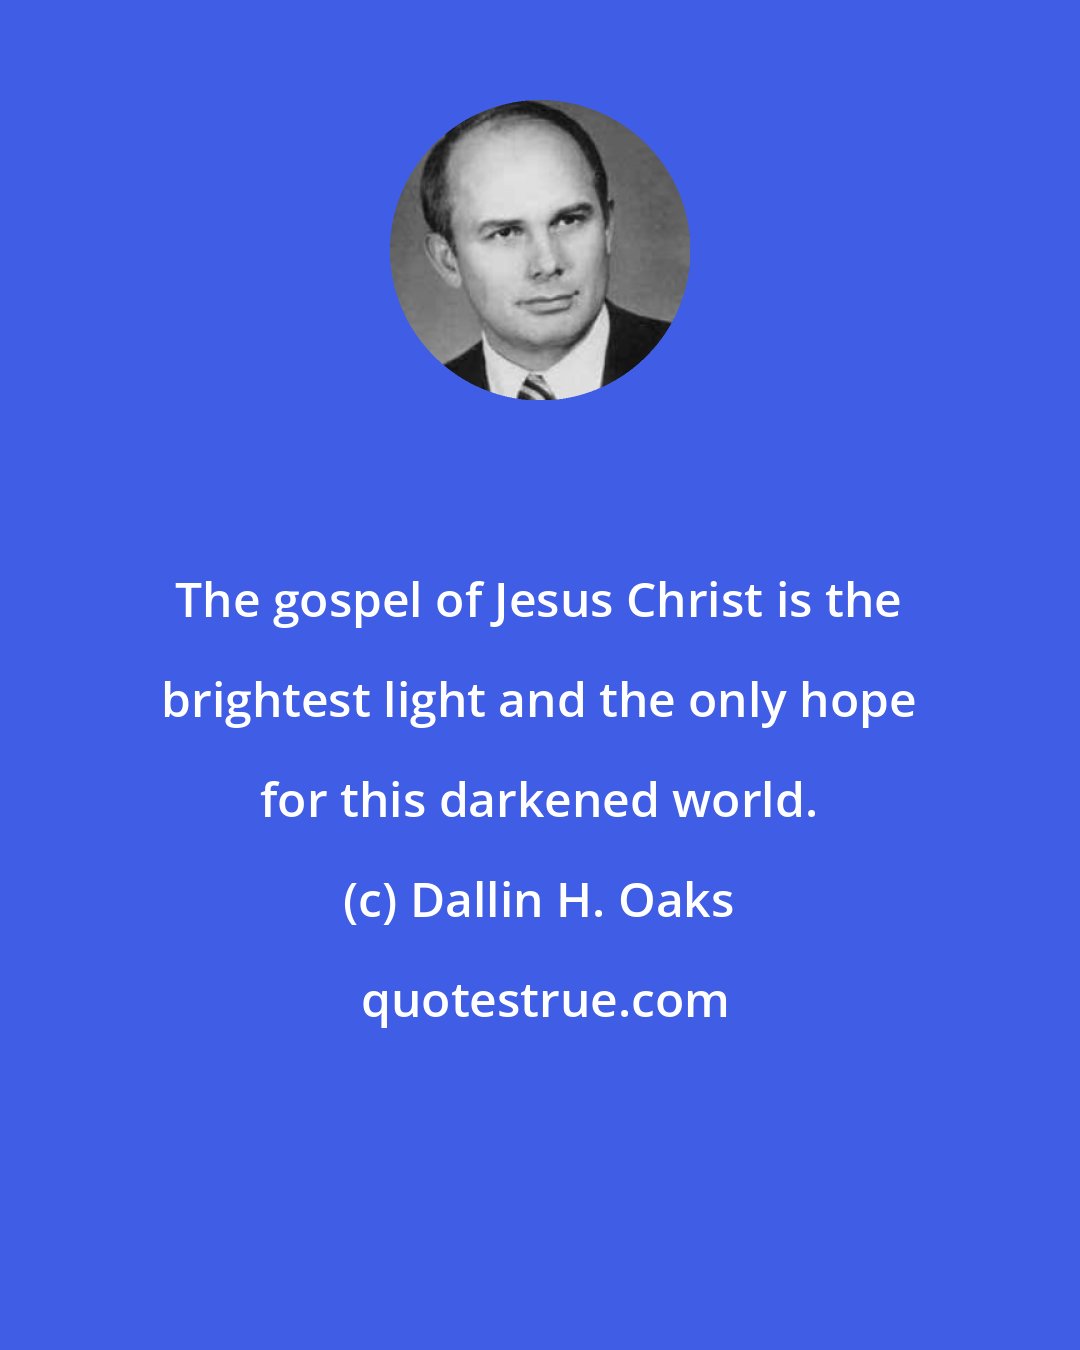 Dallin H. Oaks: The gospel of Jesus Christ is the brightest light and the only hope for this darkened world.